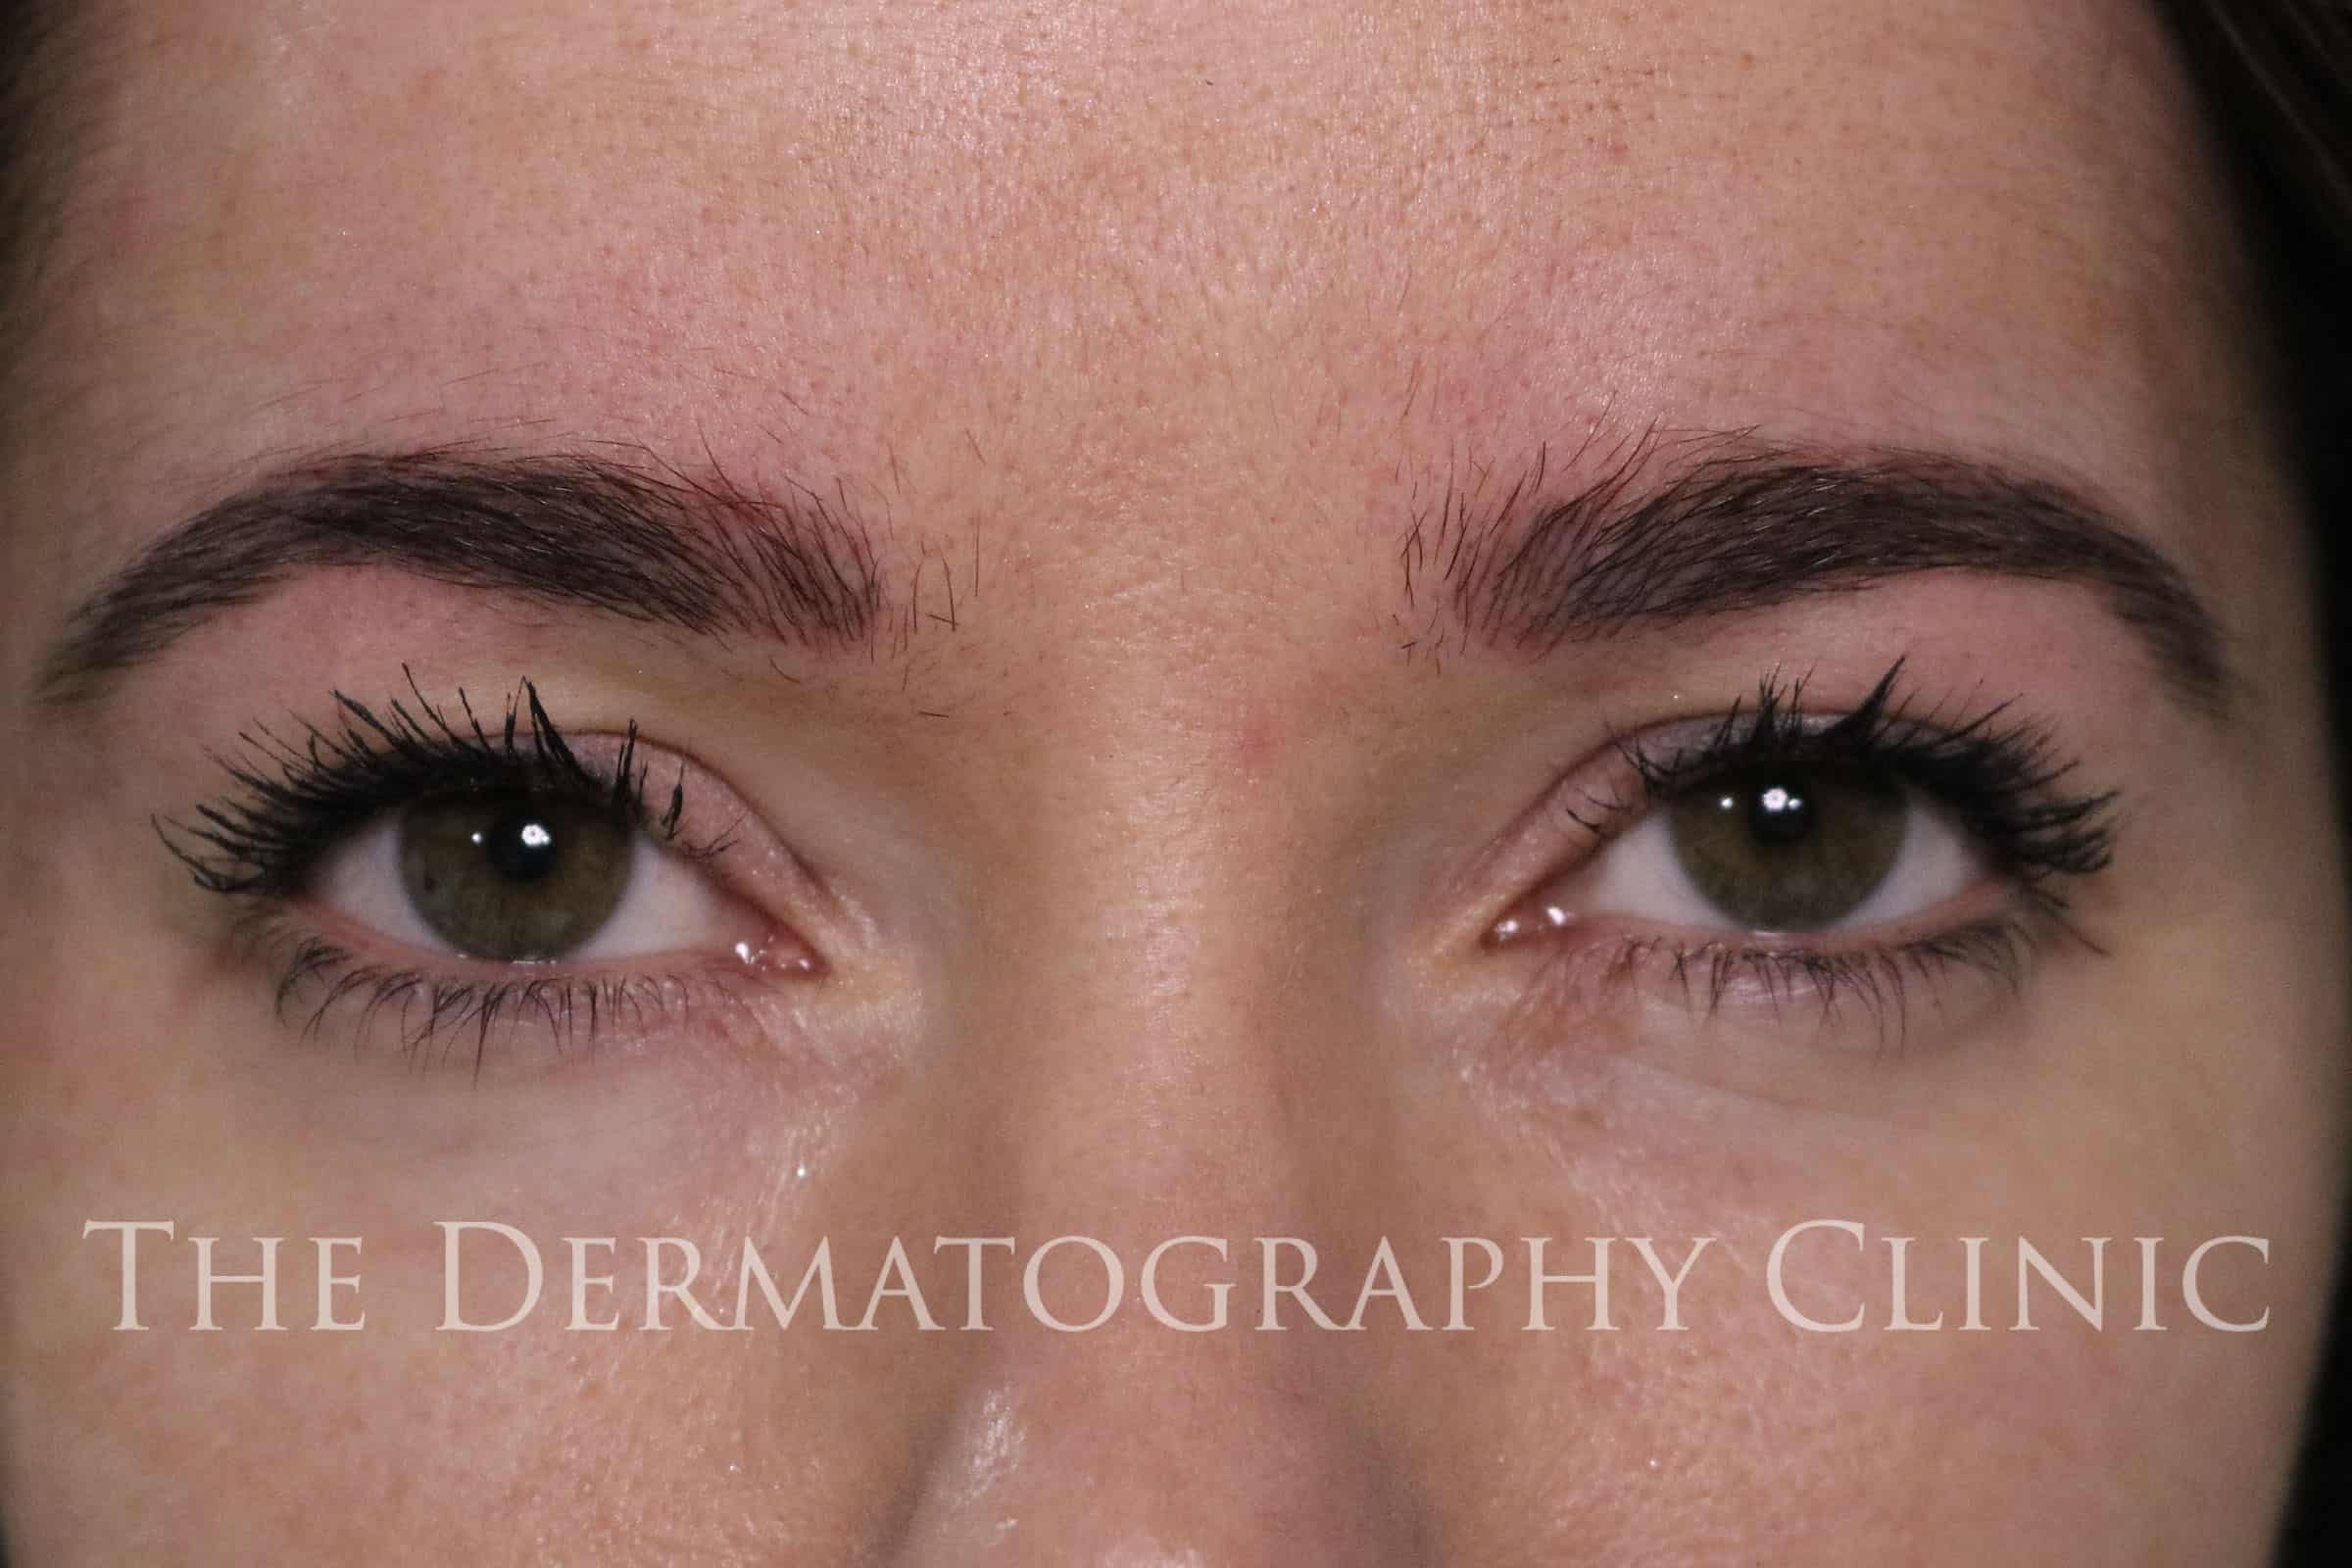 Helen Permanent Eyebrows After